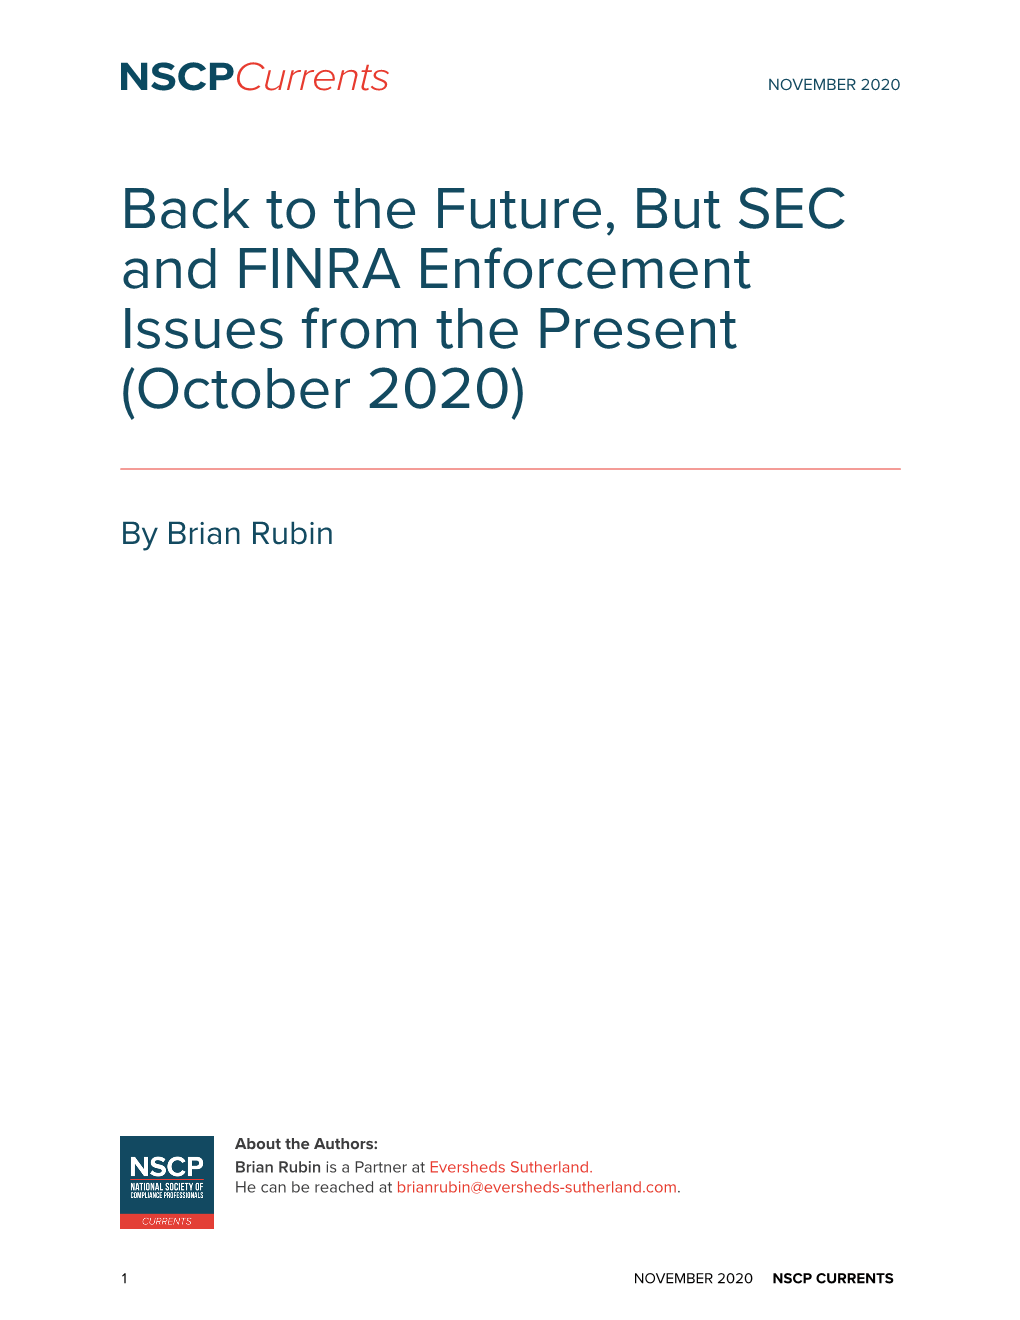 Back to the Future, but SEC and FINRA Enforcement Issues from the Present (October 2020)